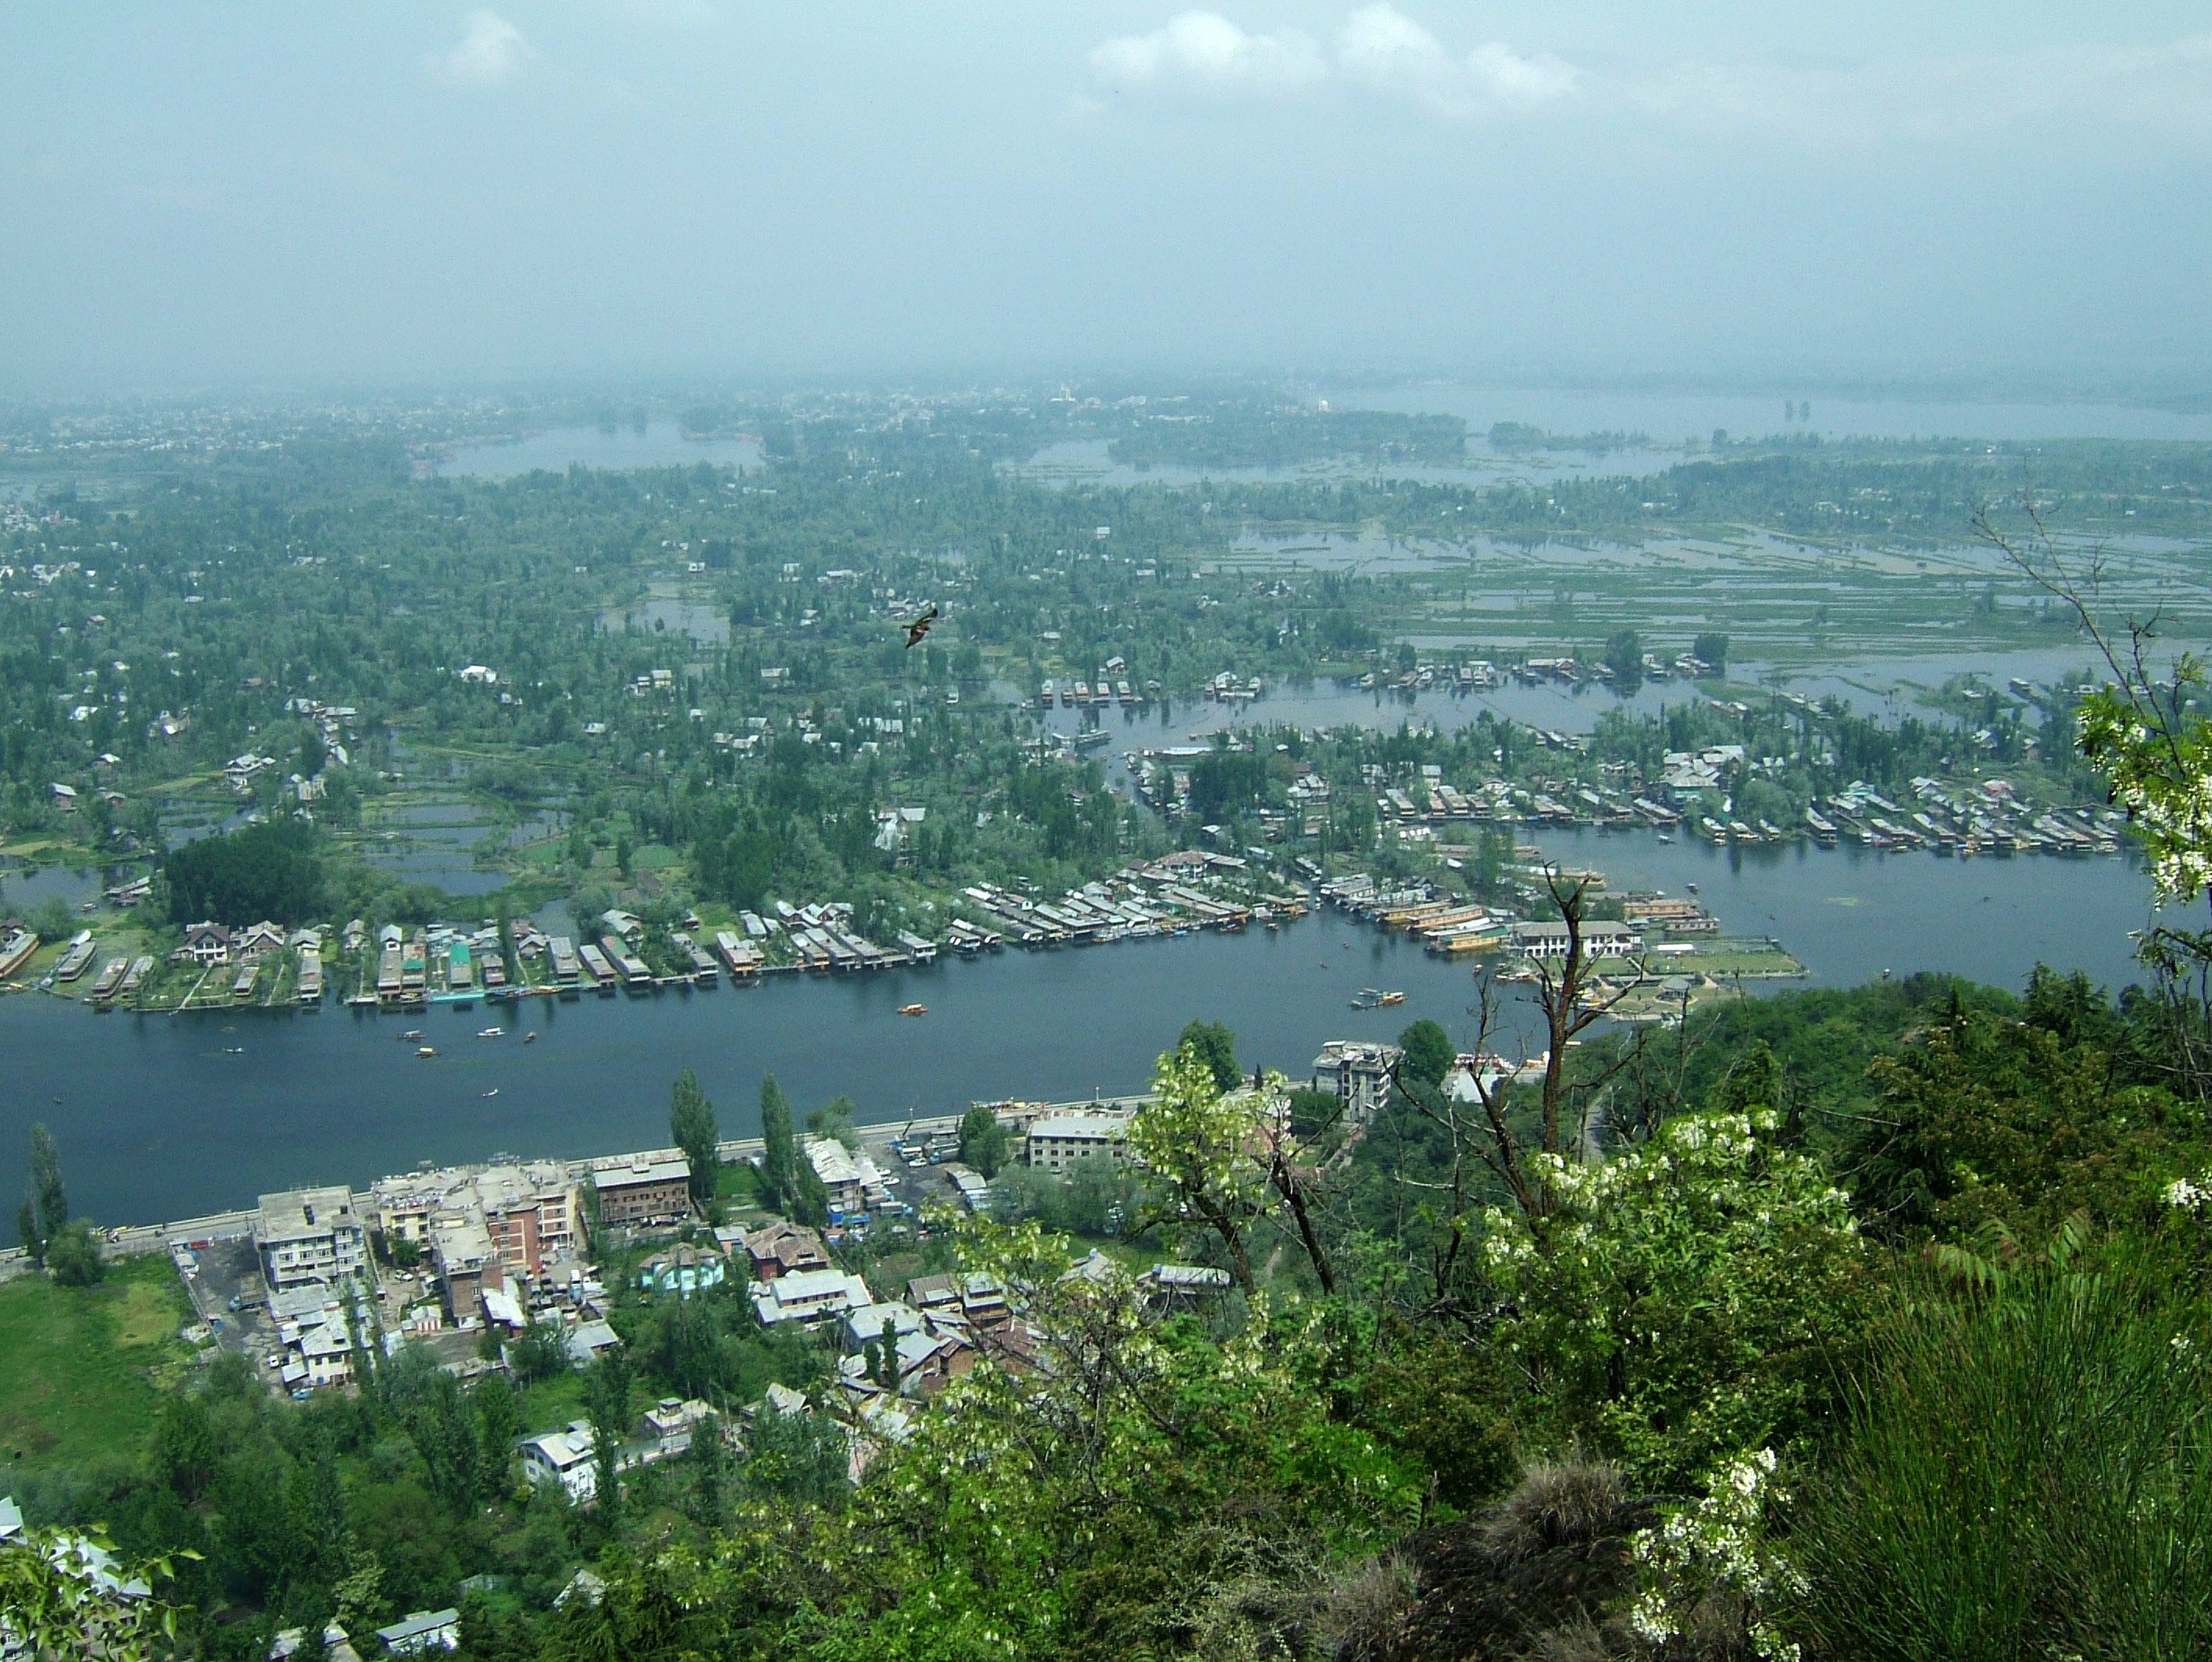 Kashmir panoramic view of Dal Lake and the city of Srinagar India Apr 2008 05